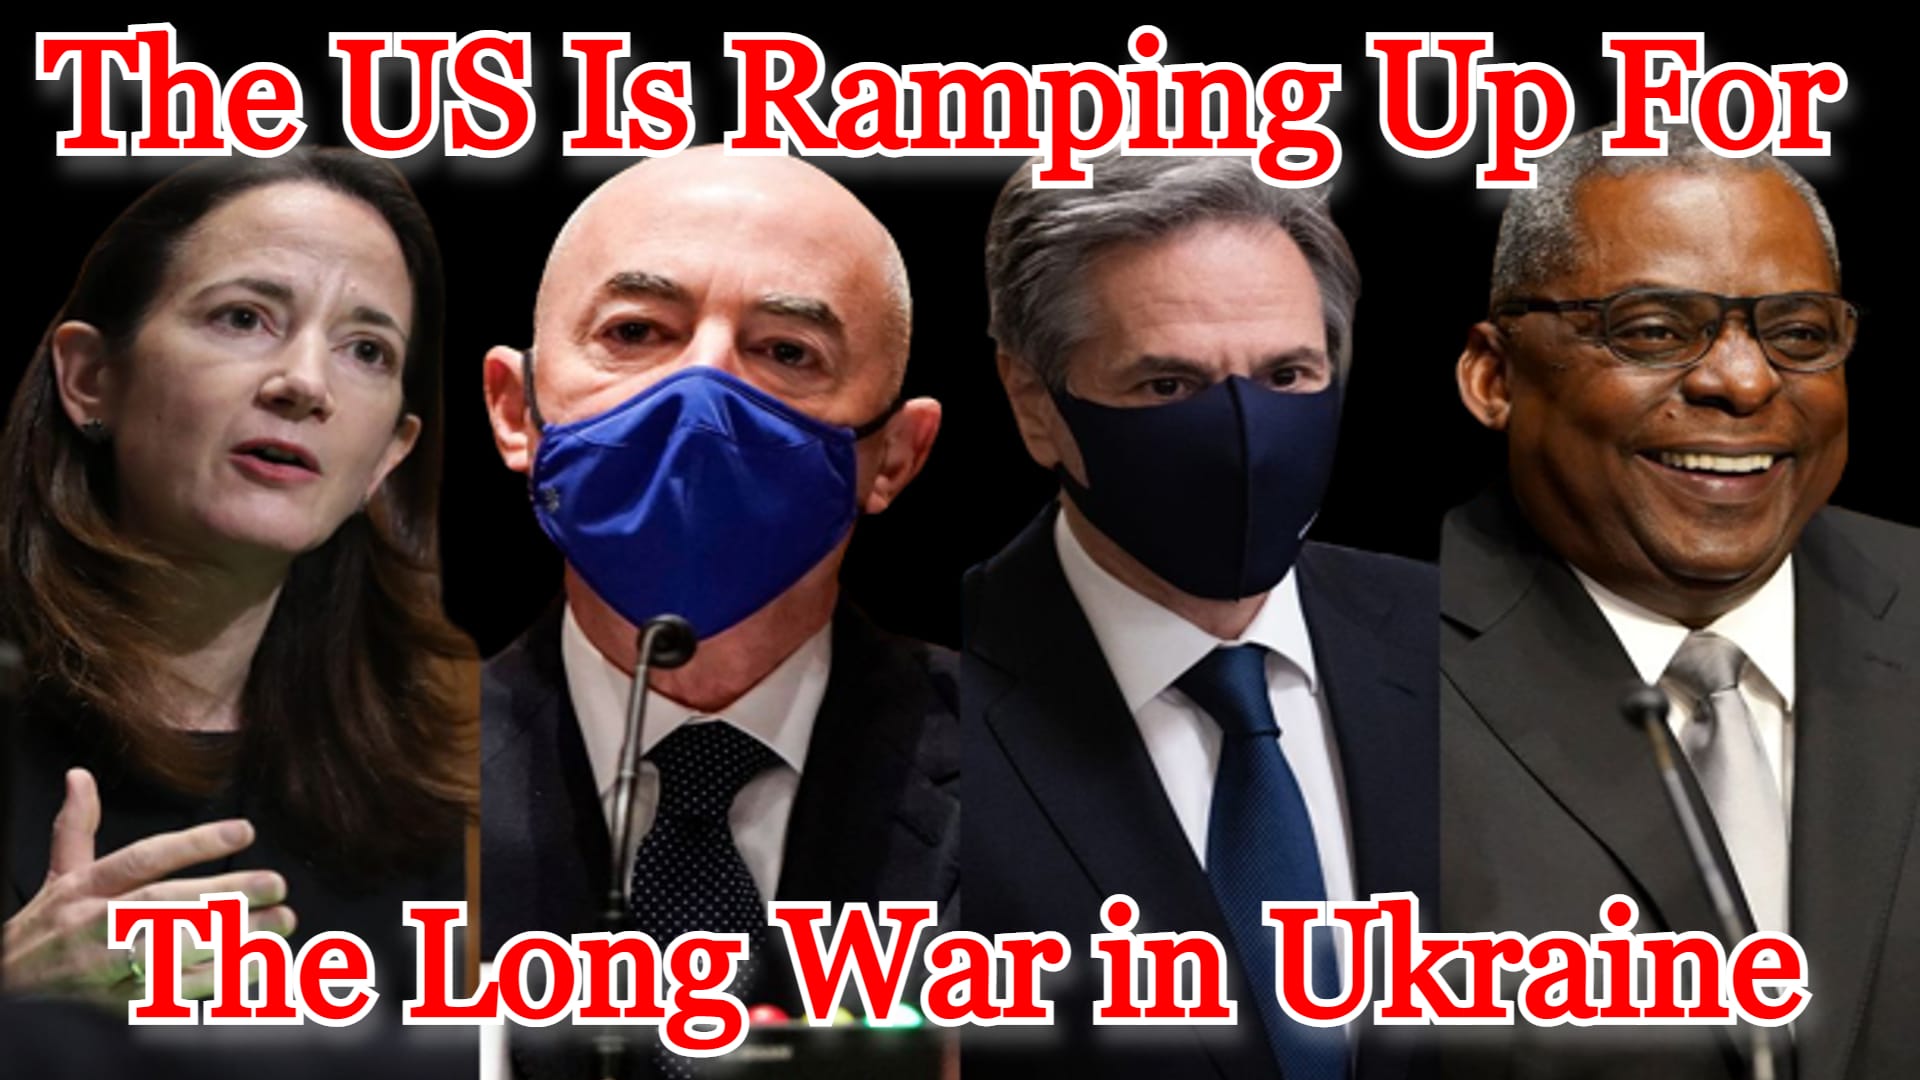 COI #346: The US Is Ramping Up for the Long War in Ukraine